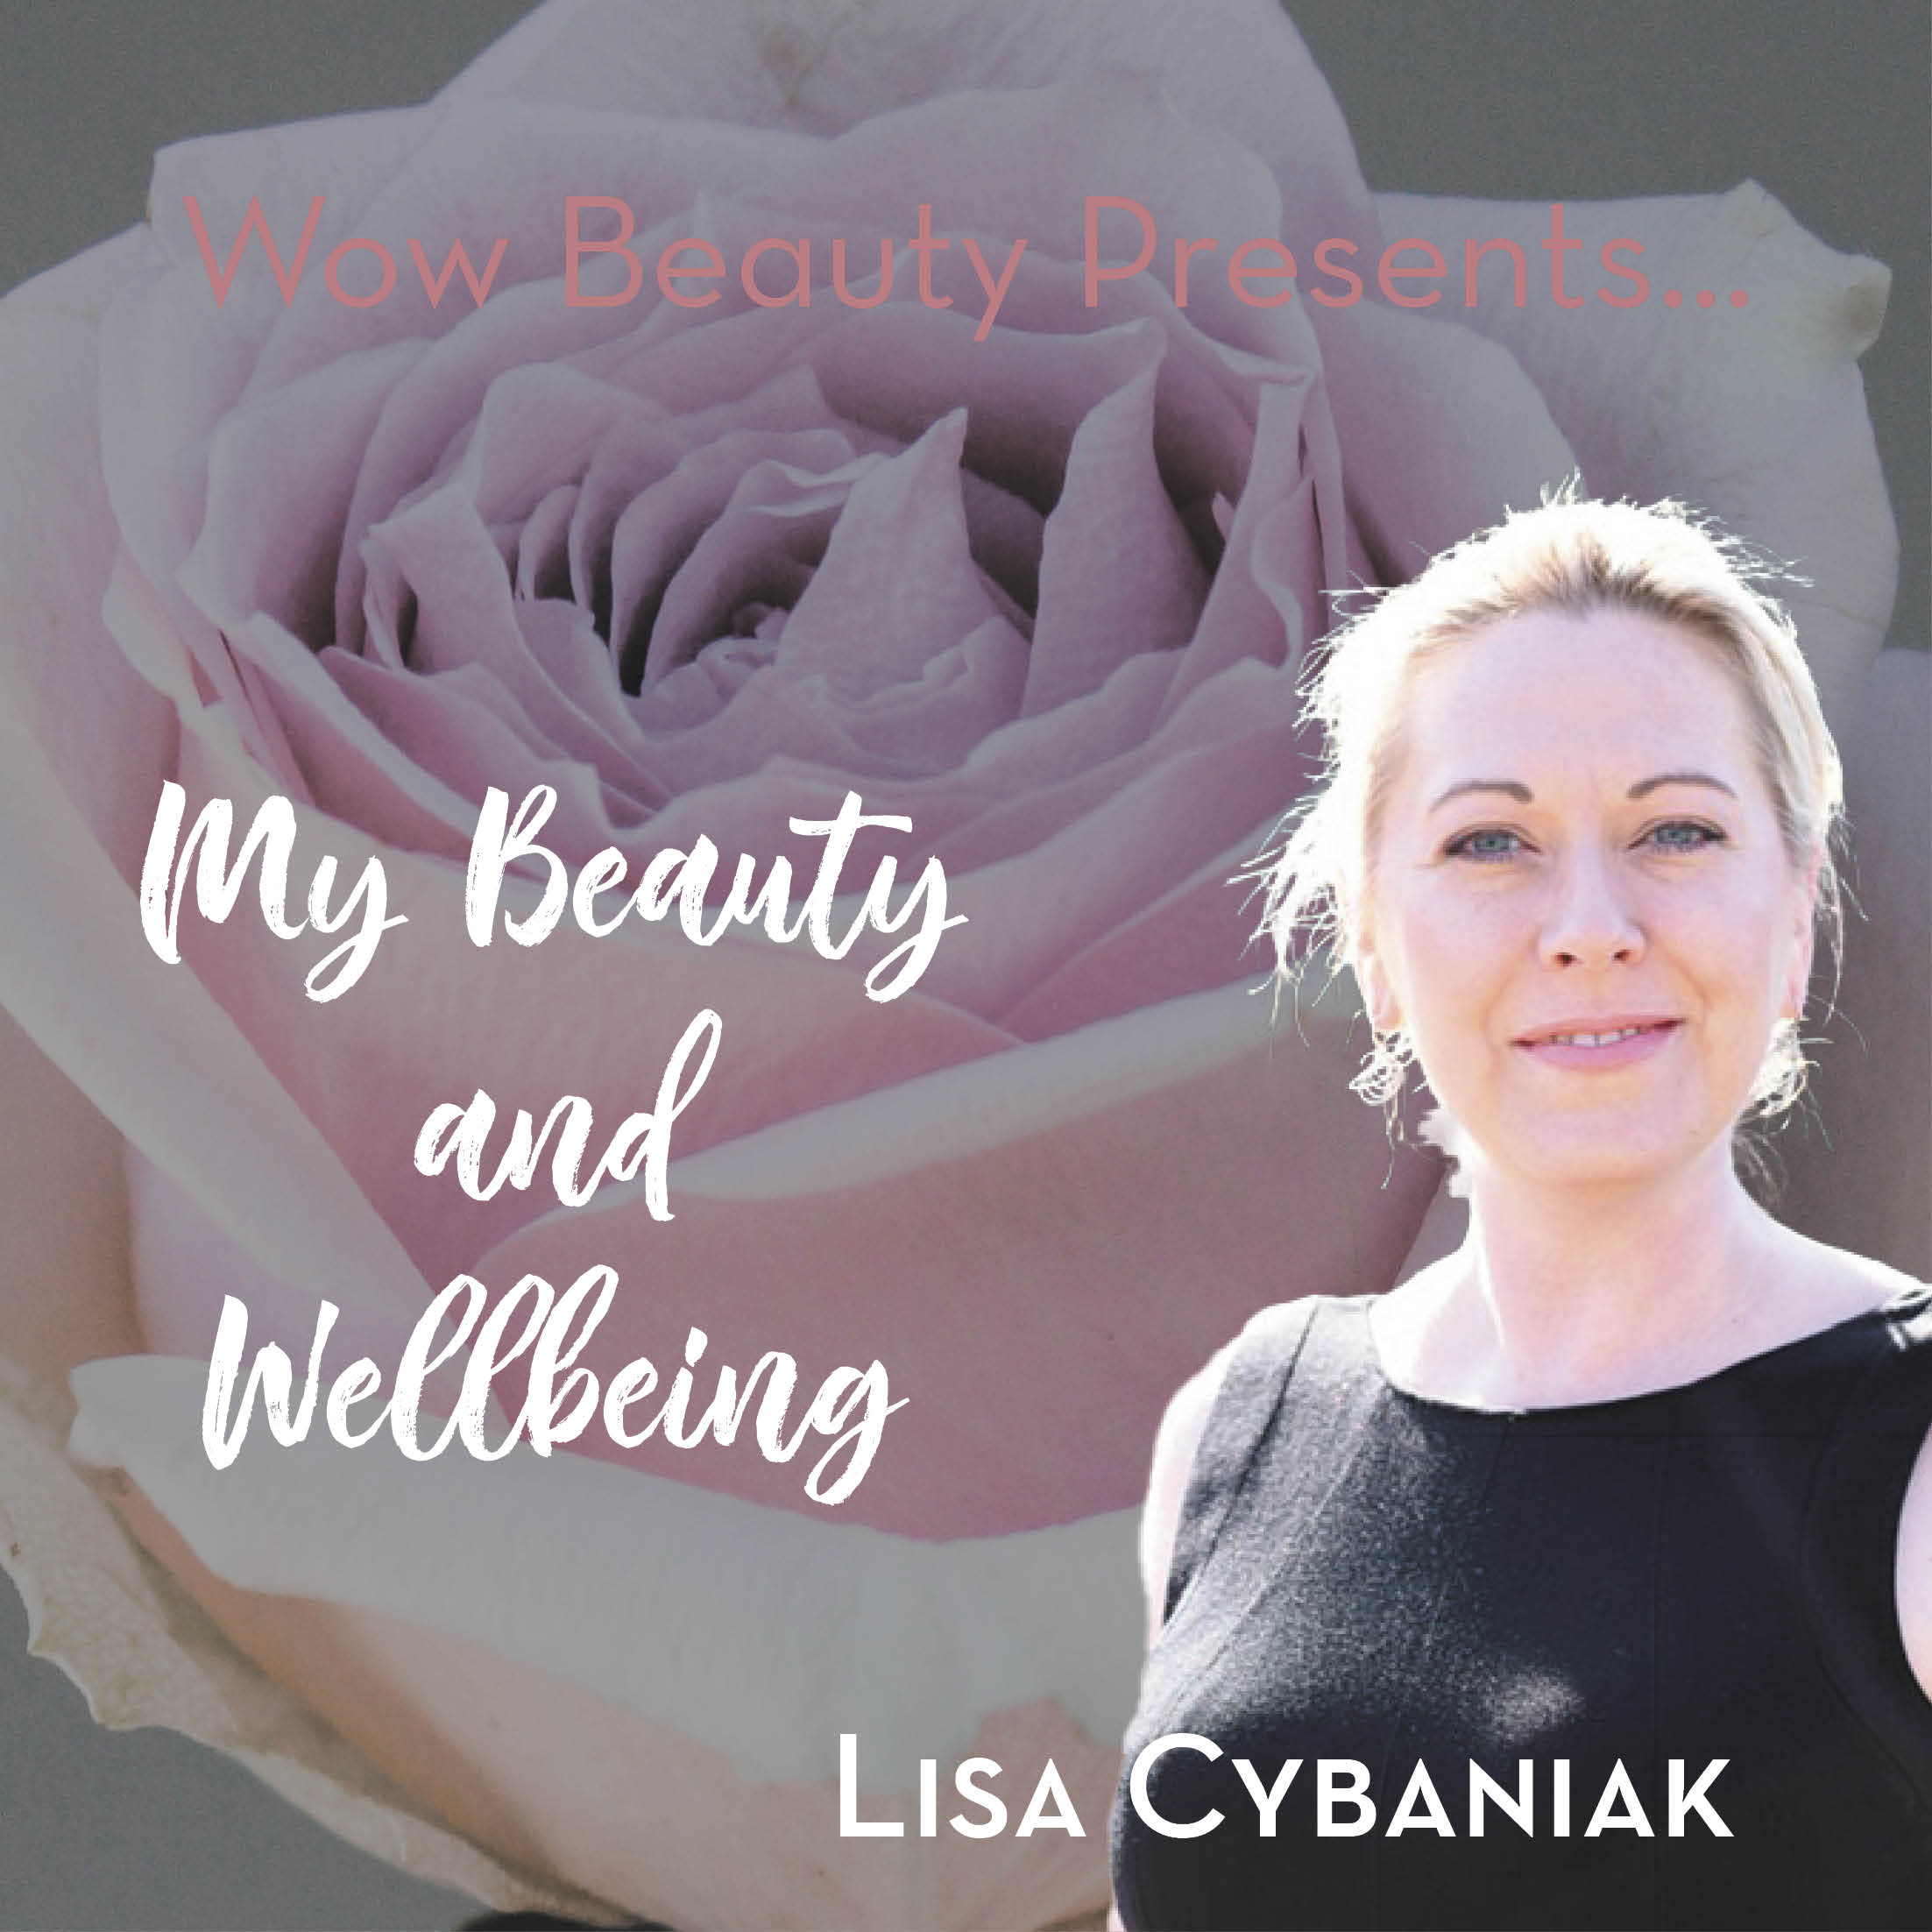 Lisa's my beauty and wellbeing story